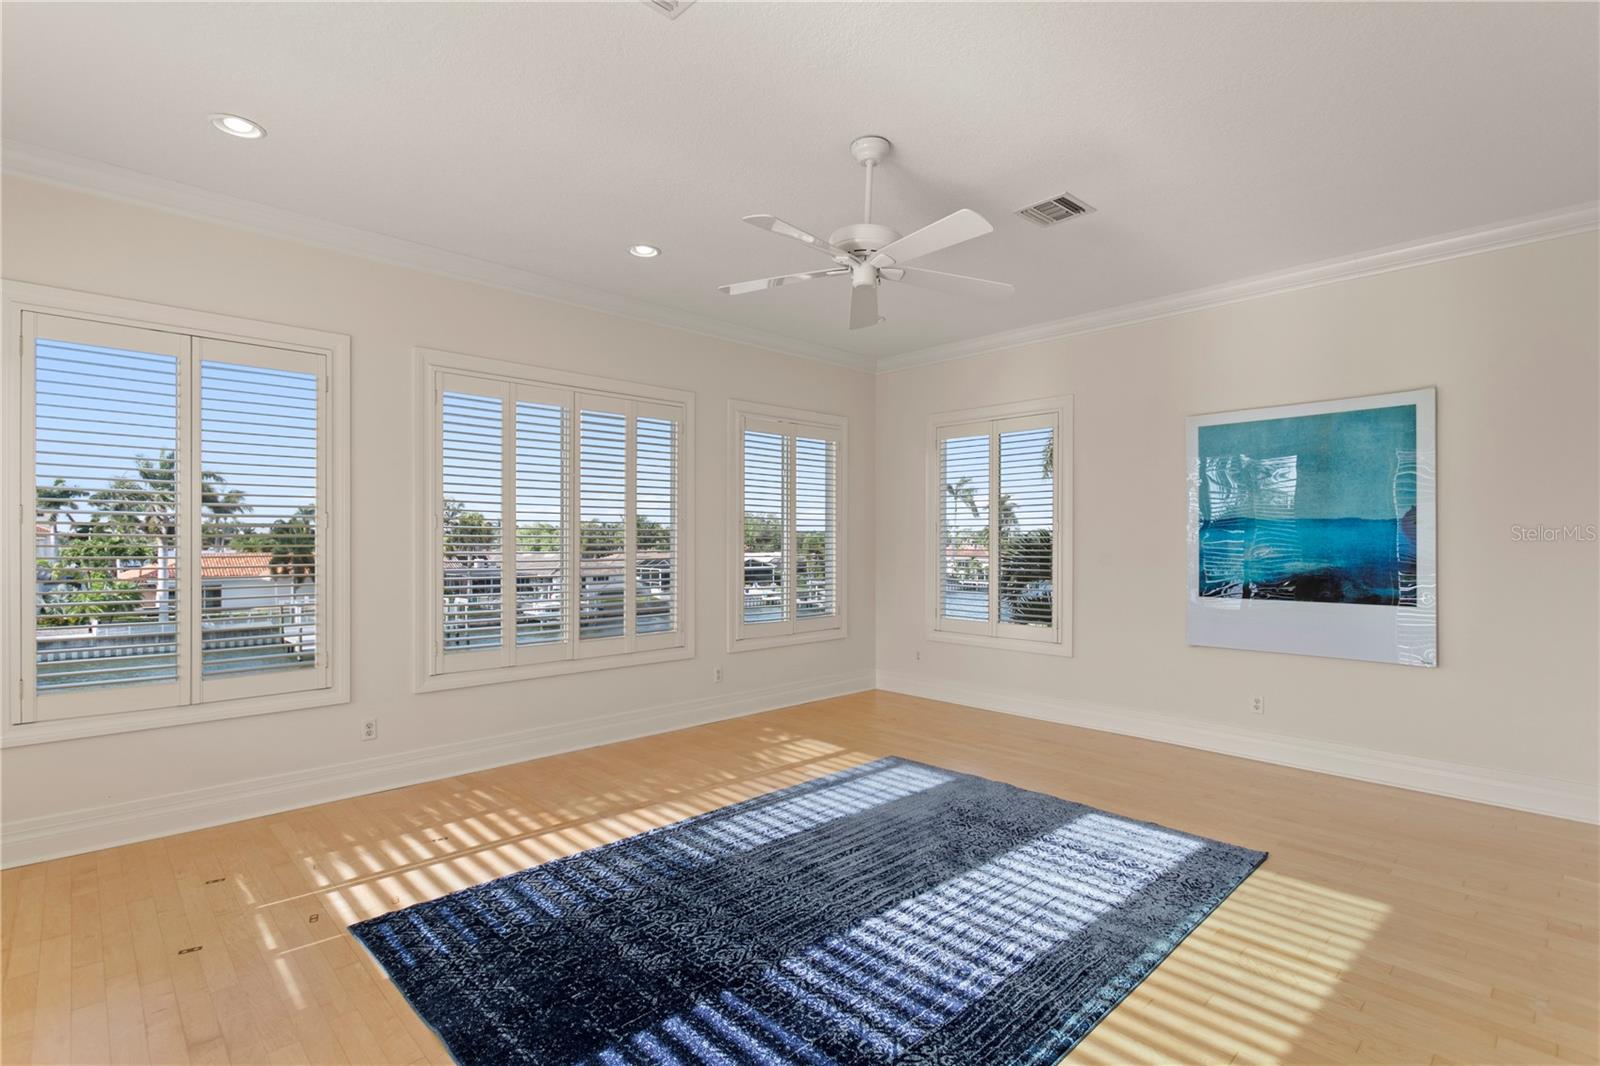 Spacious Owners Bedroom with Plantation Shutters